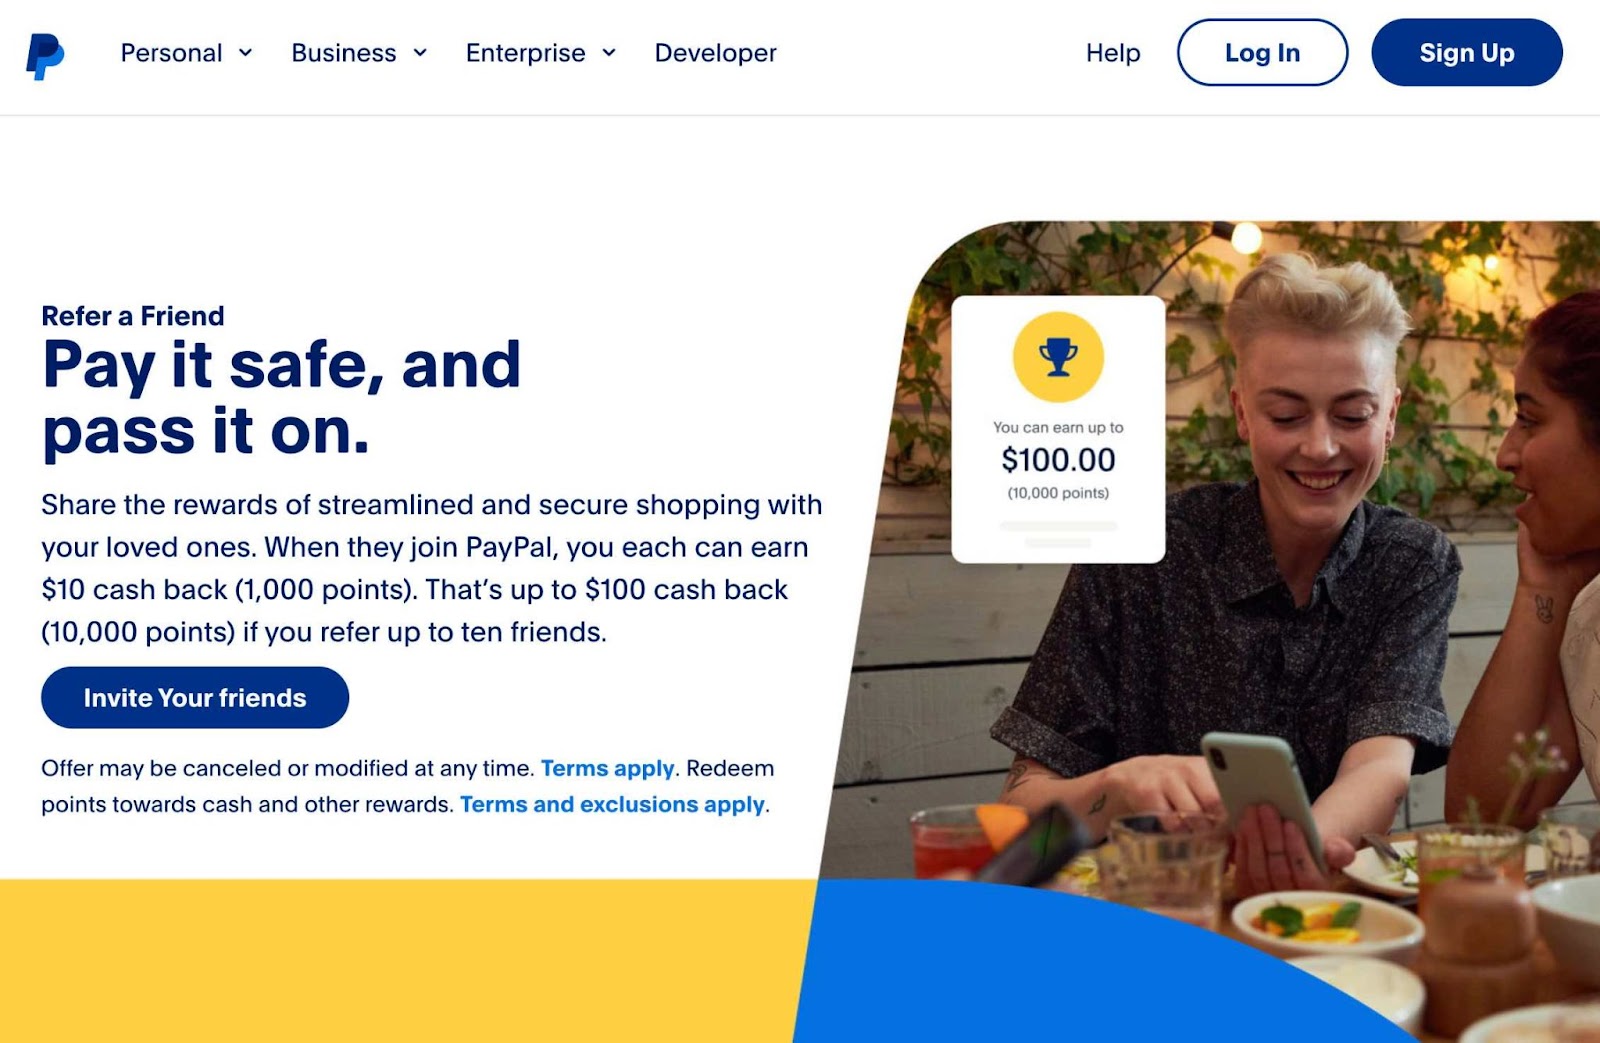 PayPal's "Refer a Friend" landing page